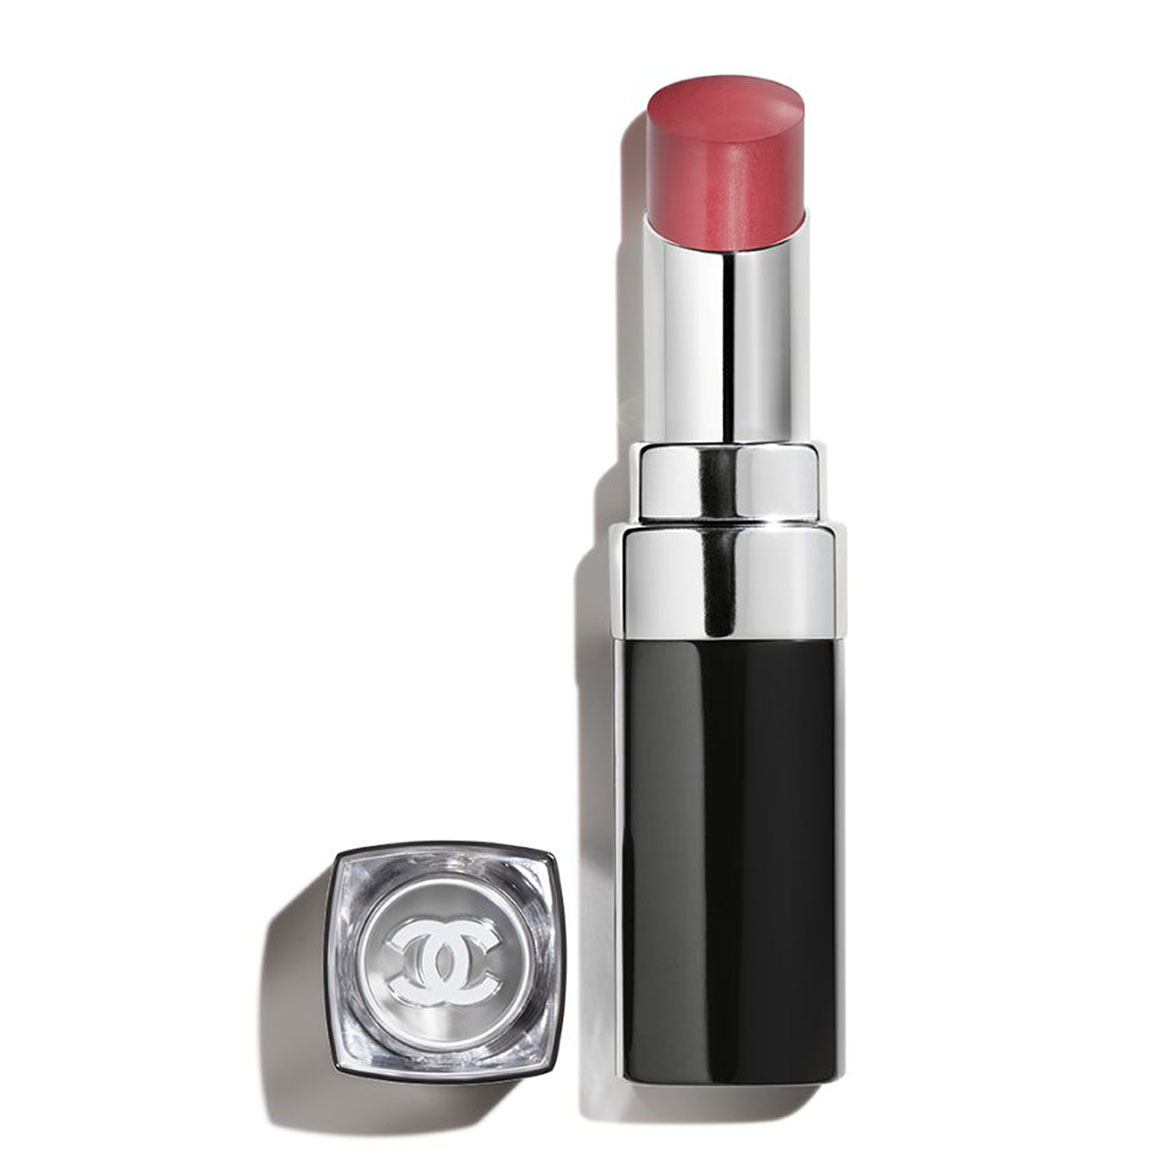 CHANEL ROUGE COCO BLOOM Hydrating & Plumping Lipstick. Intense, Long-Lasting Colour & Shine | Woolworths.co.za